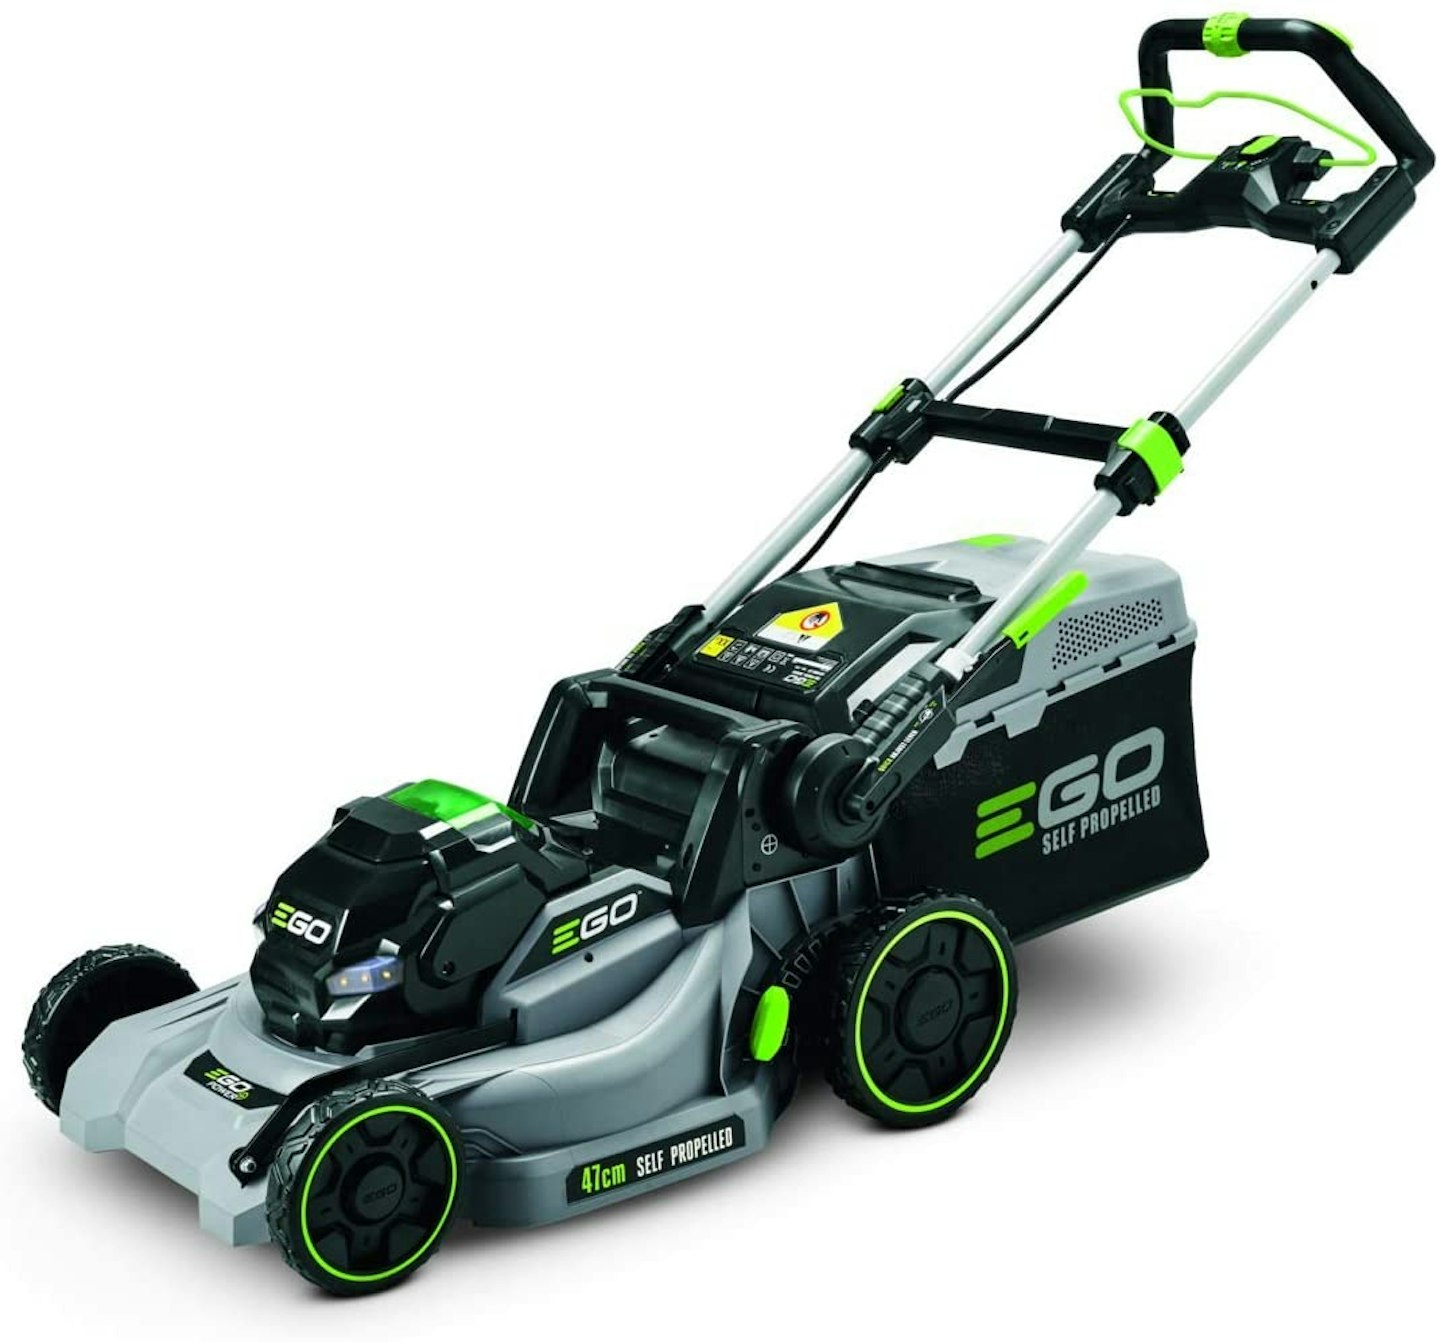 EGO LM1903E-SP 47cm Self Propelled Cordless Mower